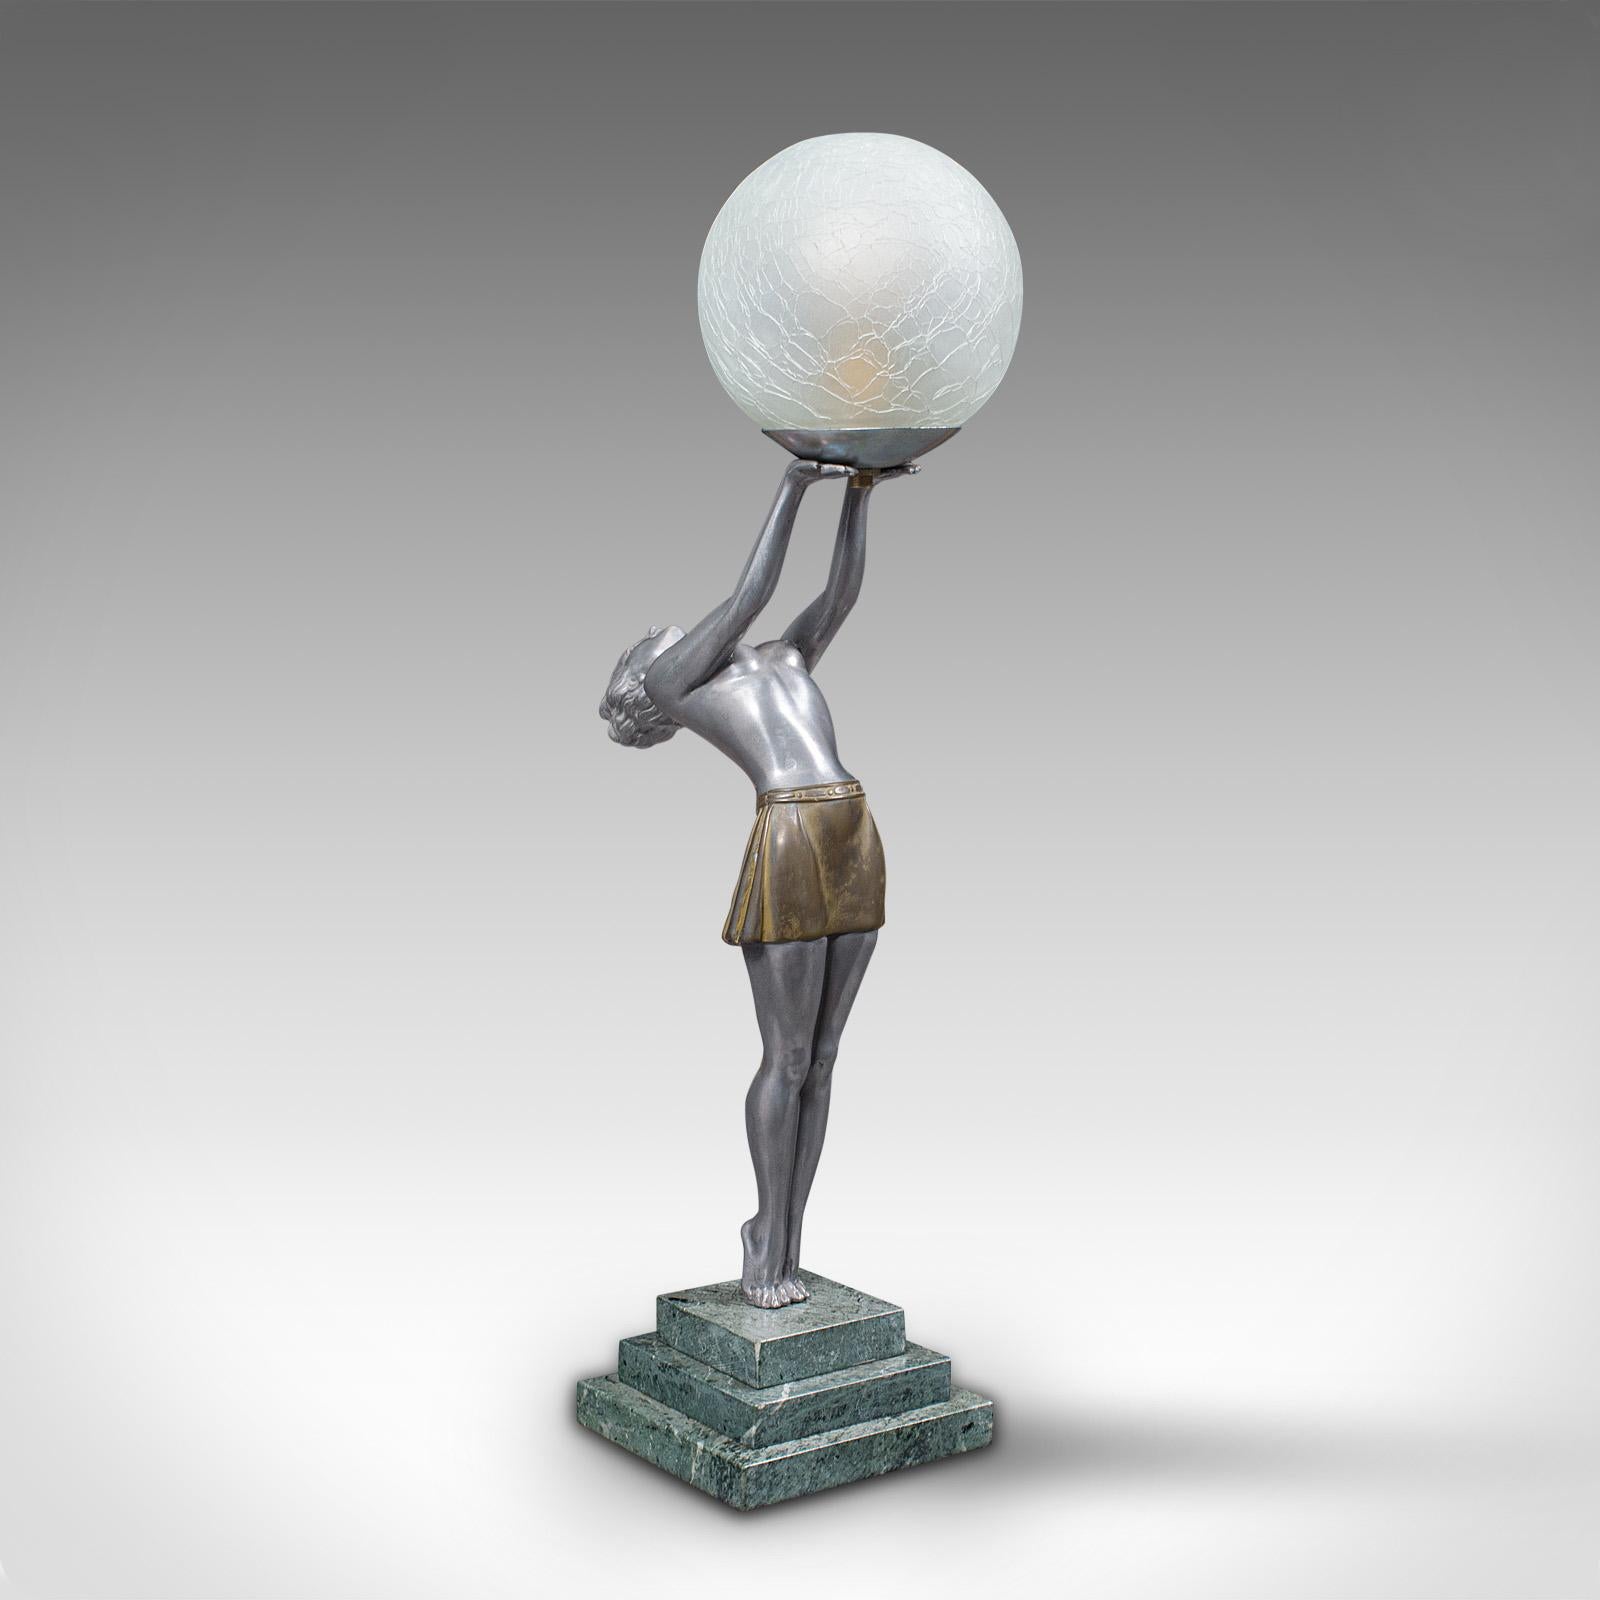 This is a vintage figural table lamp. A French, bronze spelter desk light in Art Deco taste by Balleste, dating to the early 20th century, circa 1930.

Striking Art Deco lamp in the manner of Max Le Verrier
Displays a desirable aged patina and in